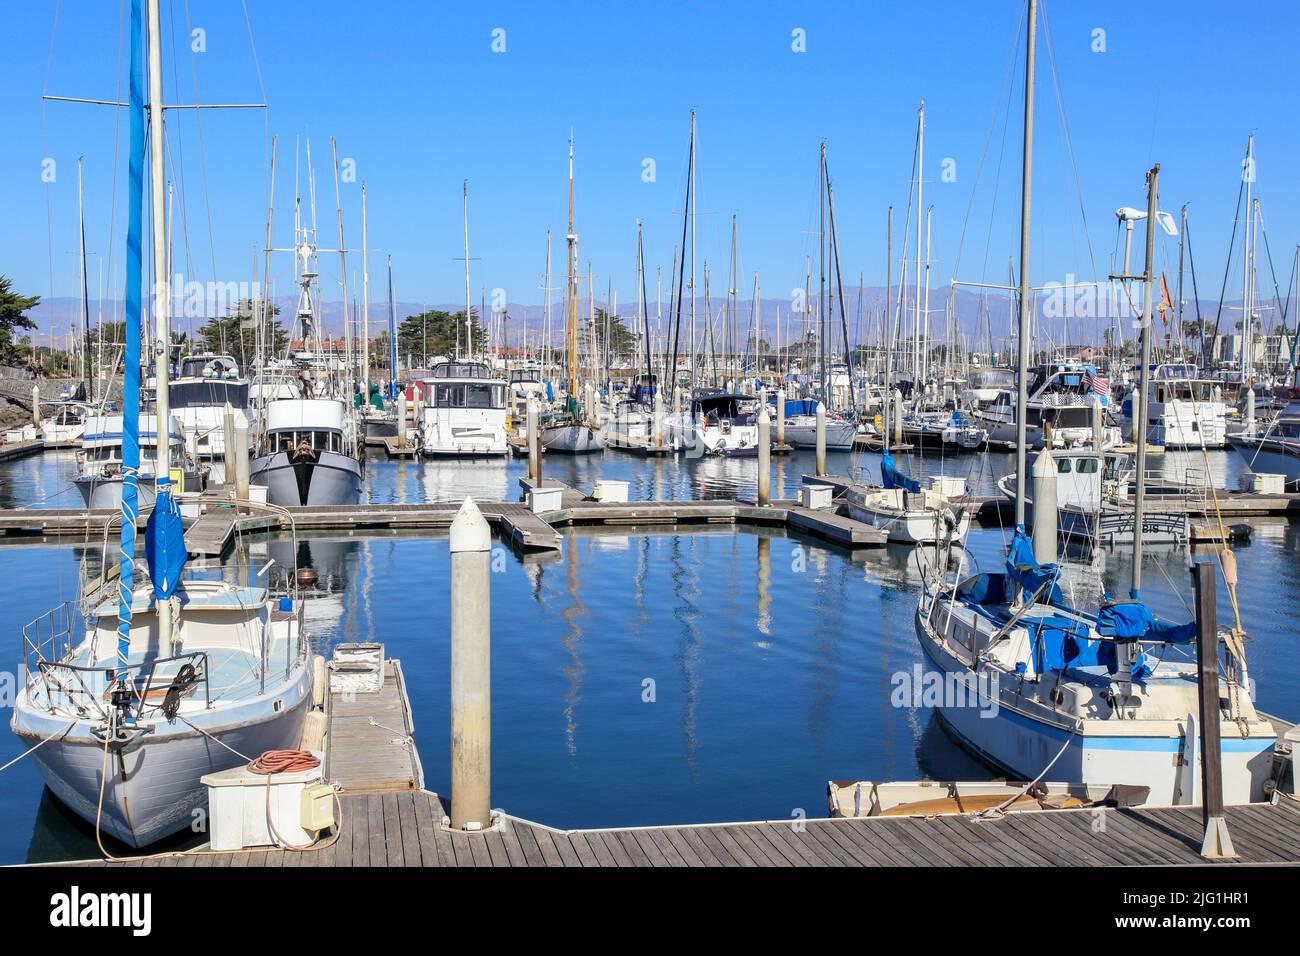 Boats and yachts at Vintage Marina in Oxnard, California on a sunny afternoon Stock Photo